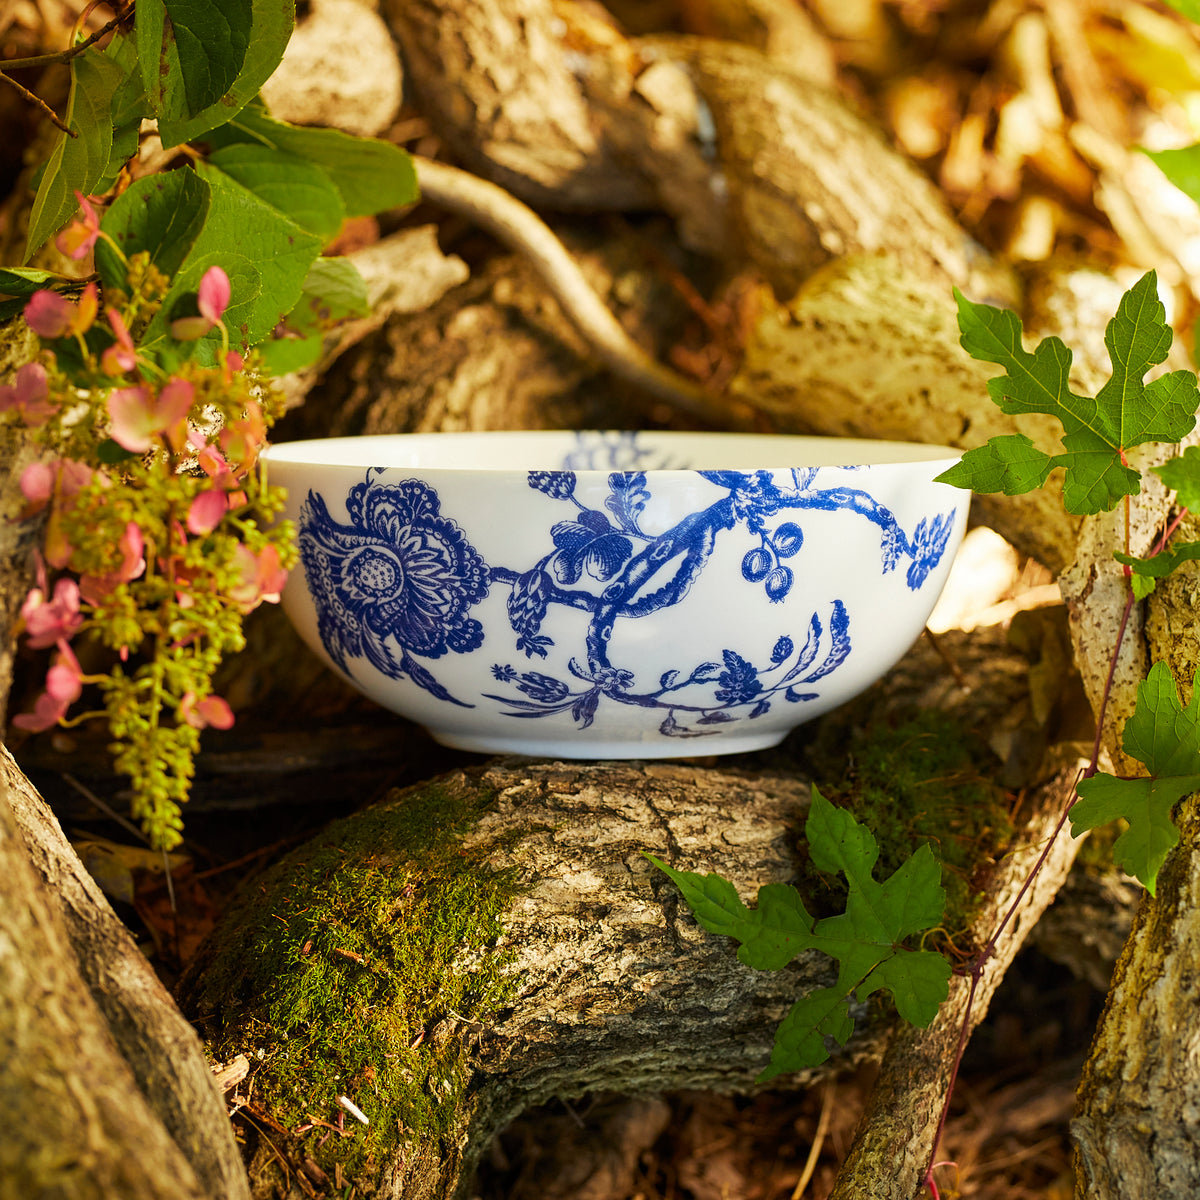 An Arcadia Vegetable Serving Bowl by Caskata Artisanal Home with blue floral patterns rests on a twisted tree branch, surrounded by green leaves and pink flowers. This exquisite piece is inspired by designs from the Williamsburg Foundation.